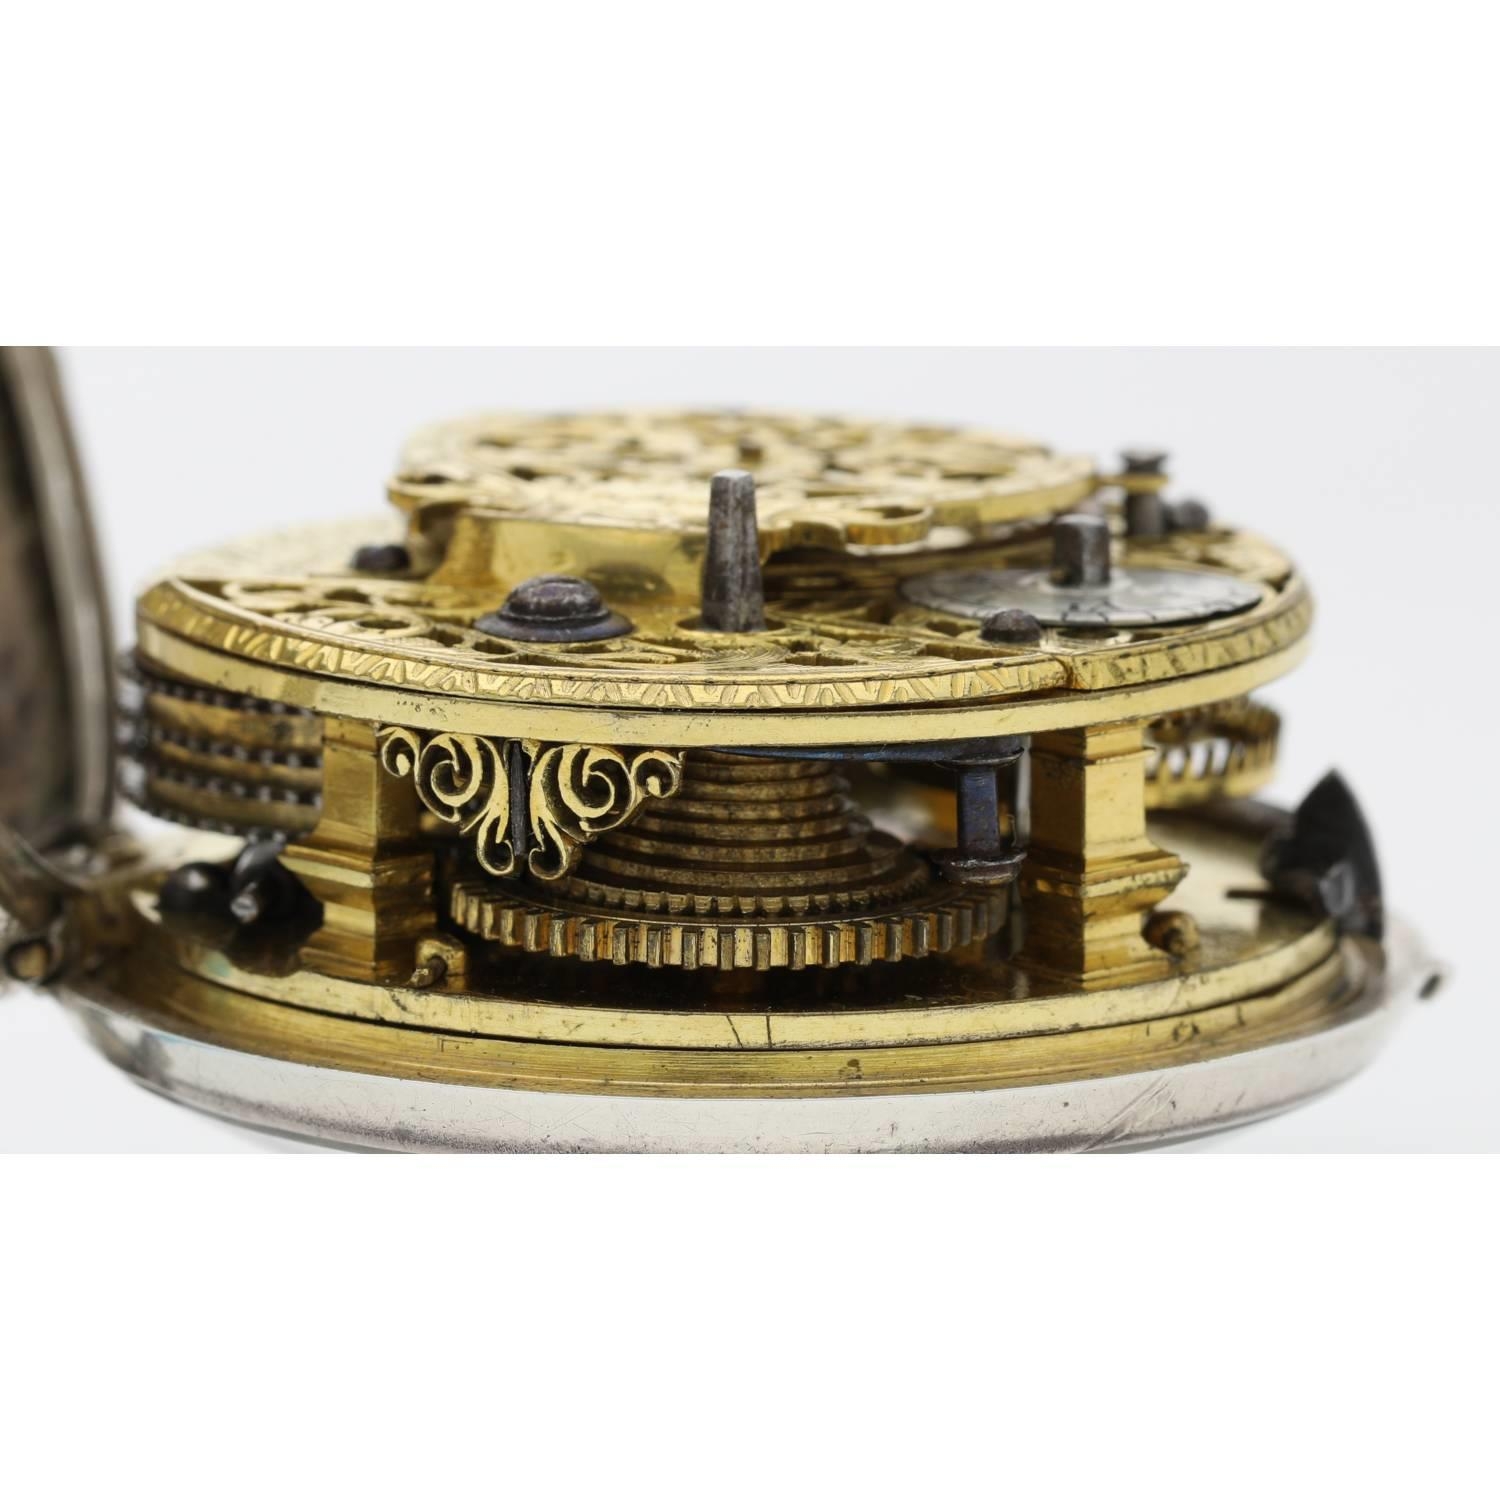 Samuel Weldon, London - English 18th century silver pair cased verge pocket watch, signed fusee - Image 5 of 11